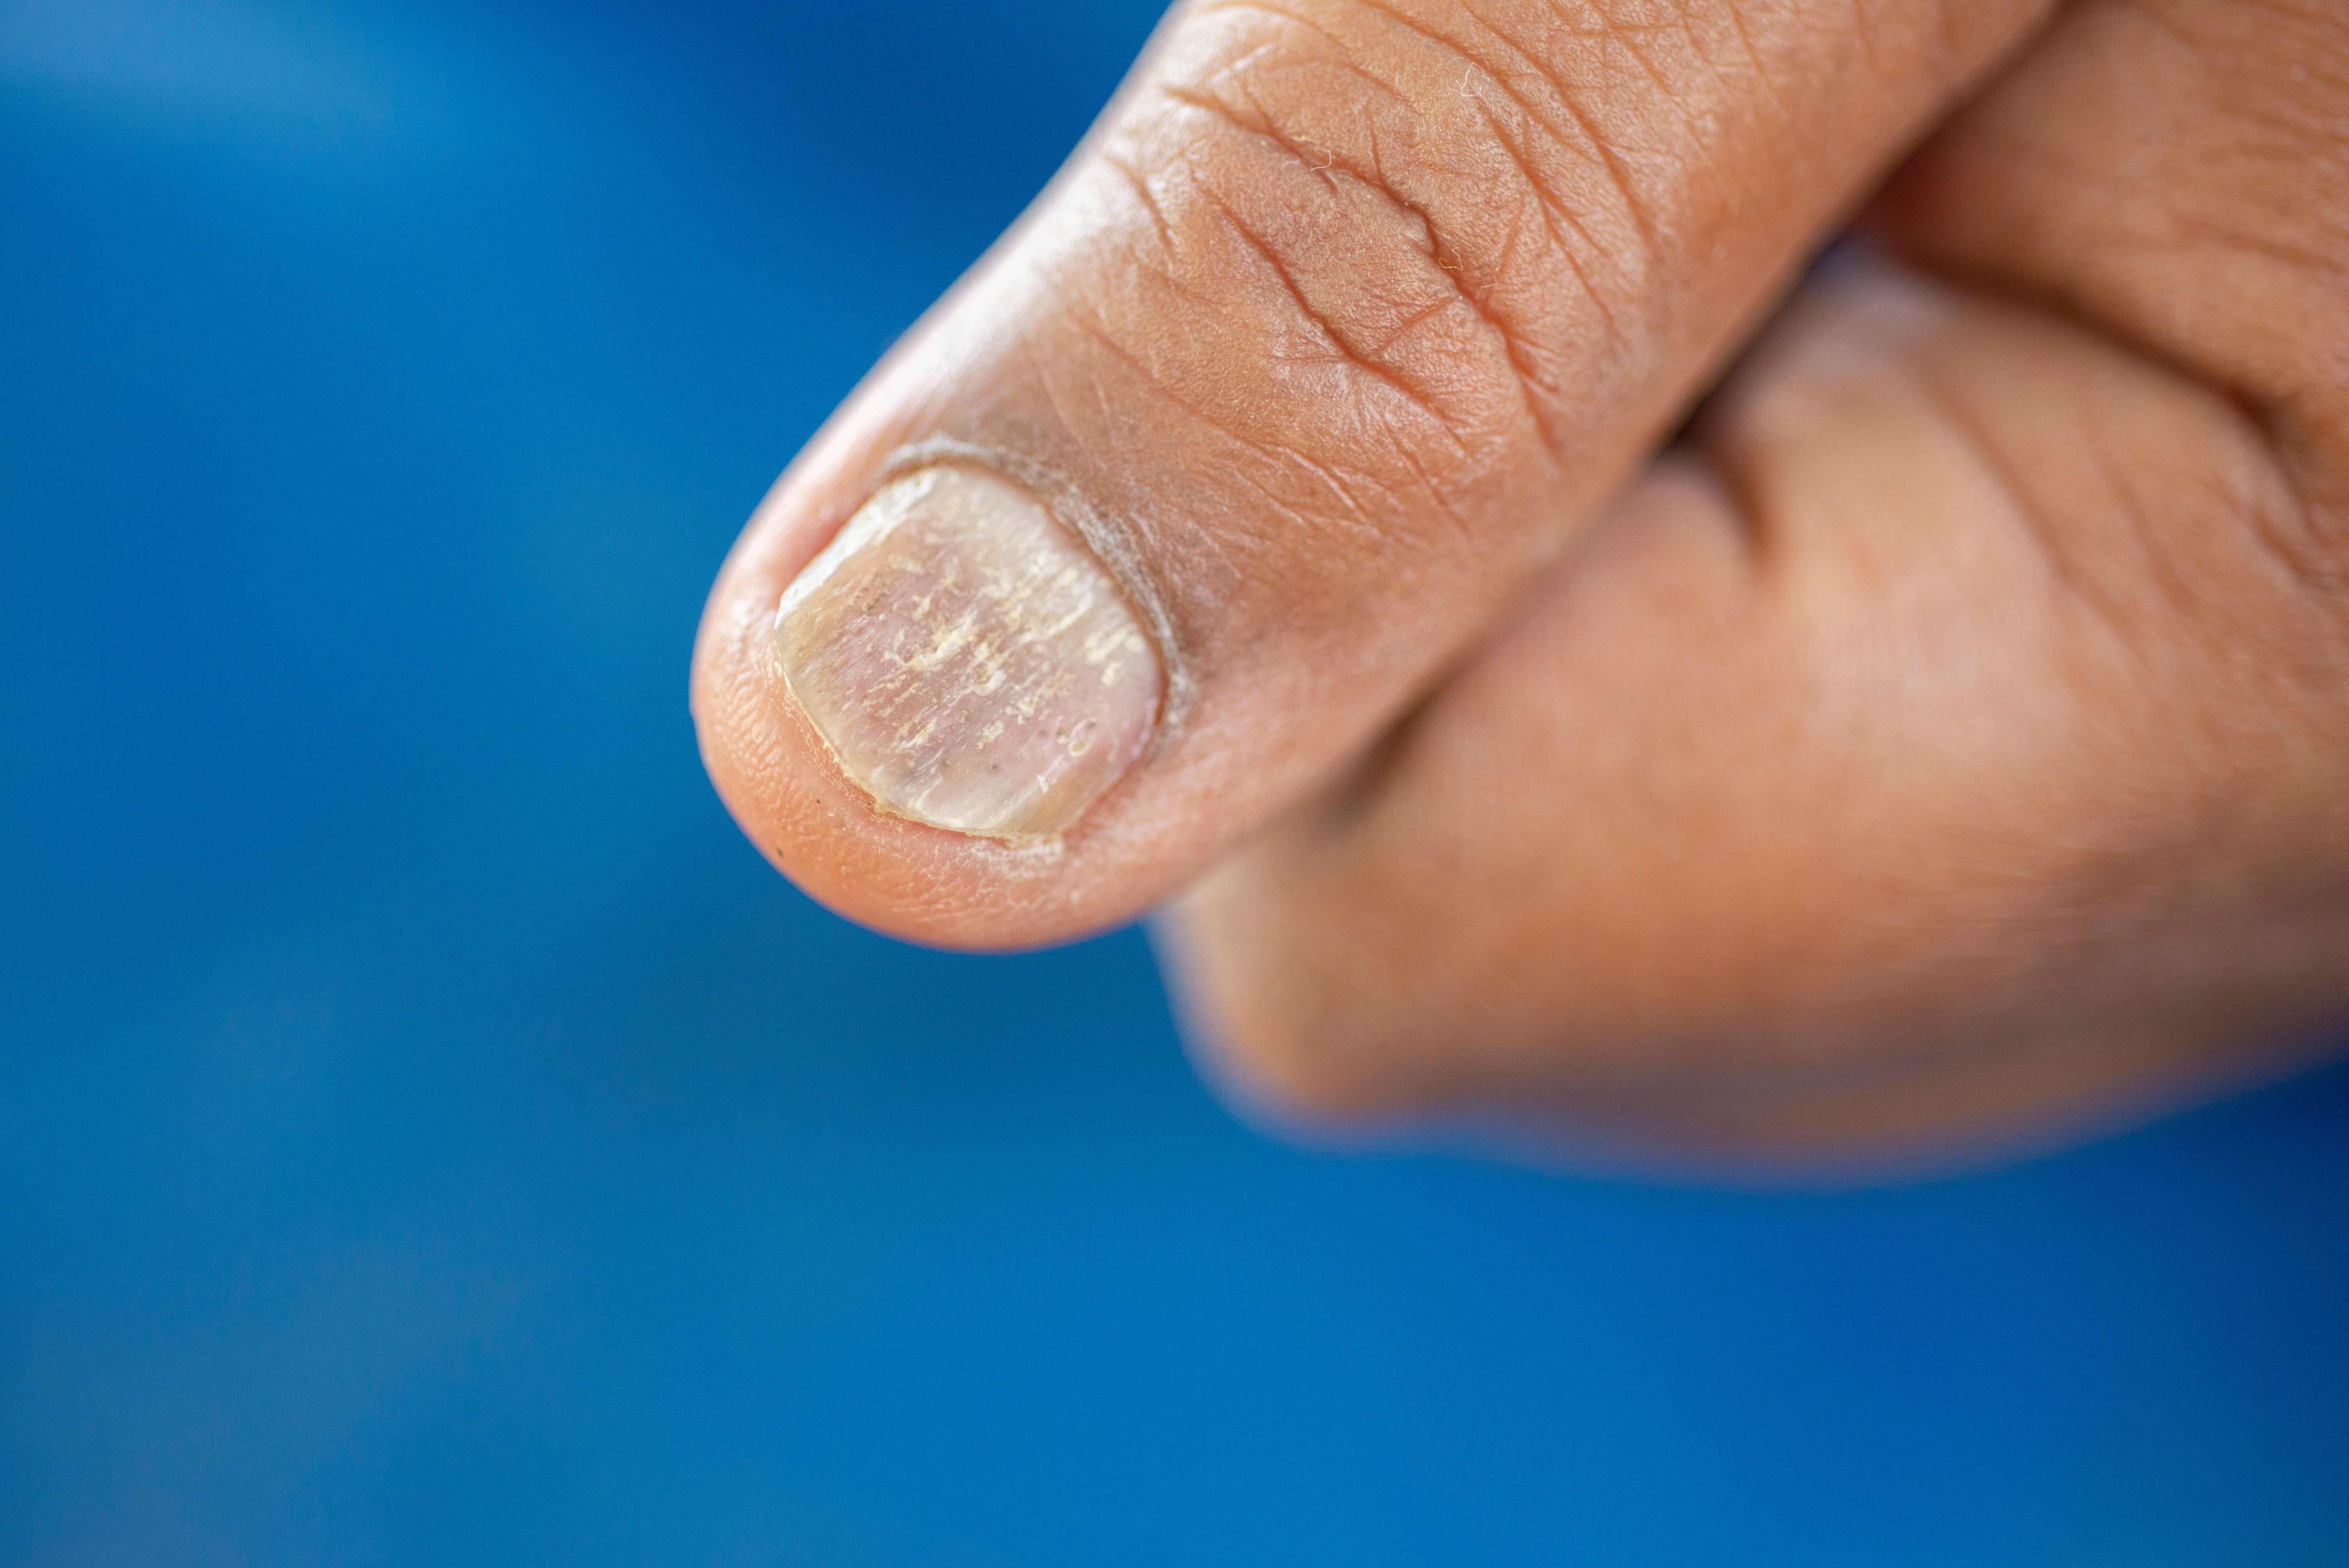 5 Causes of White Spots on Nails (With Images) - GoodRx